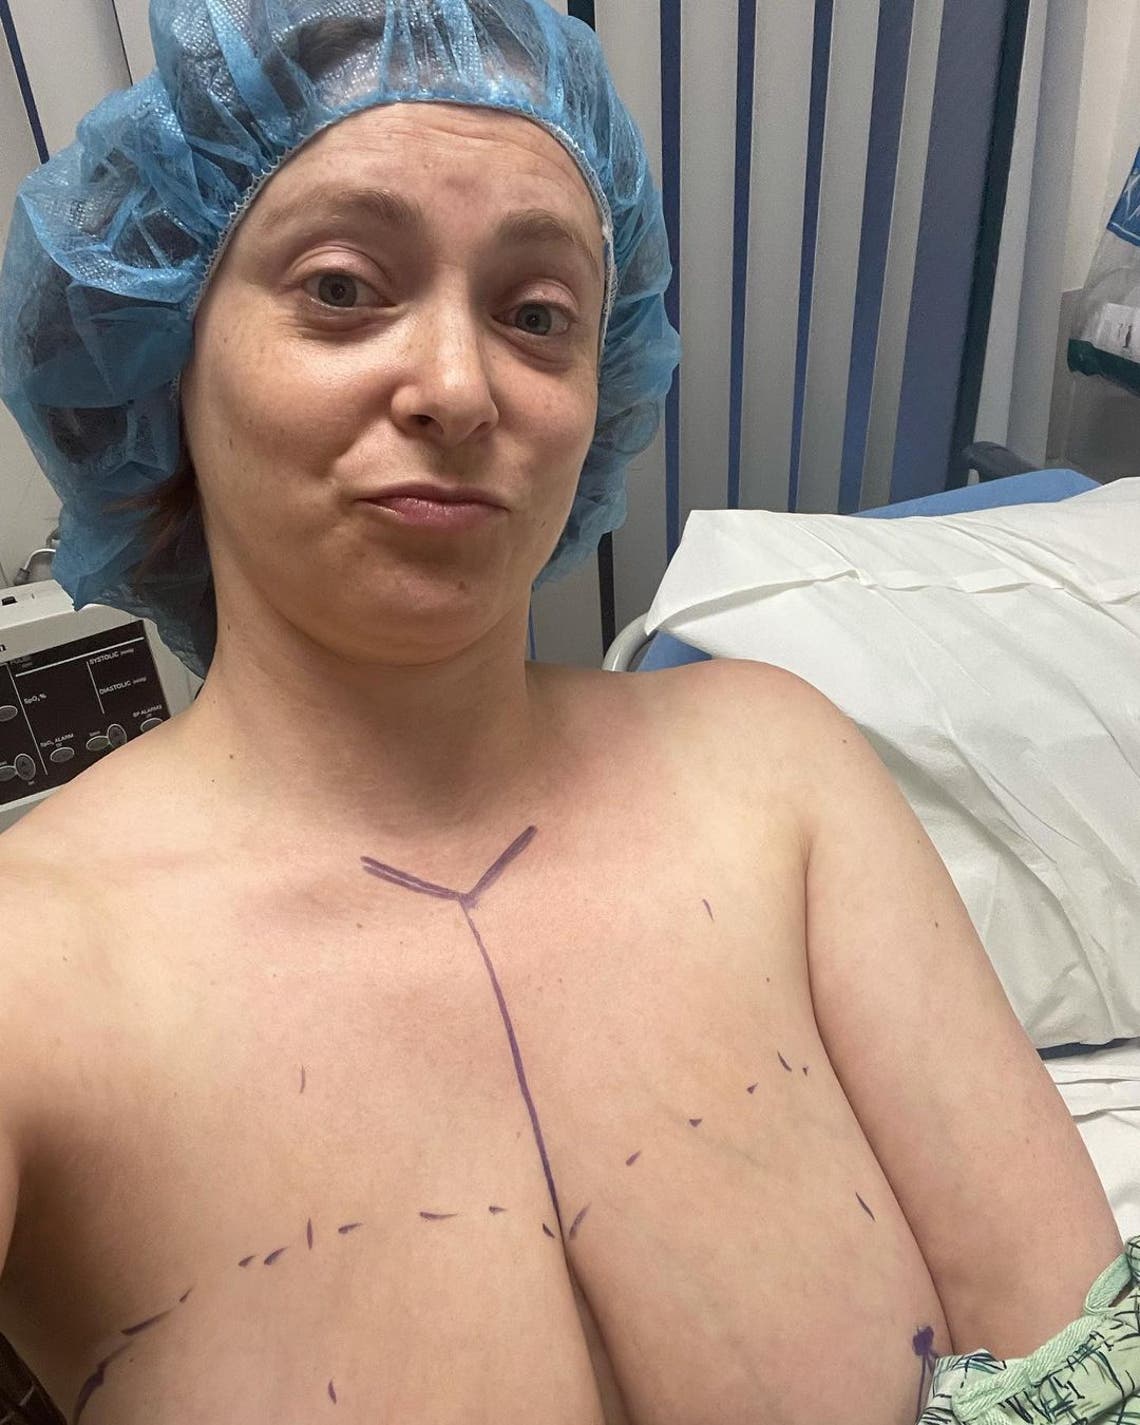 My nipples have been put on too high!': Woman, 57, says she felt like a  'freak' after bungled breast reduction to cure back pain